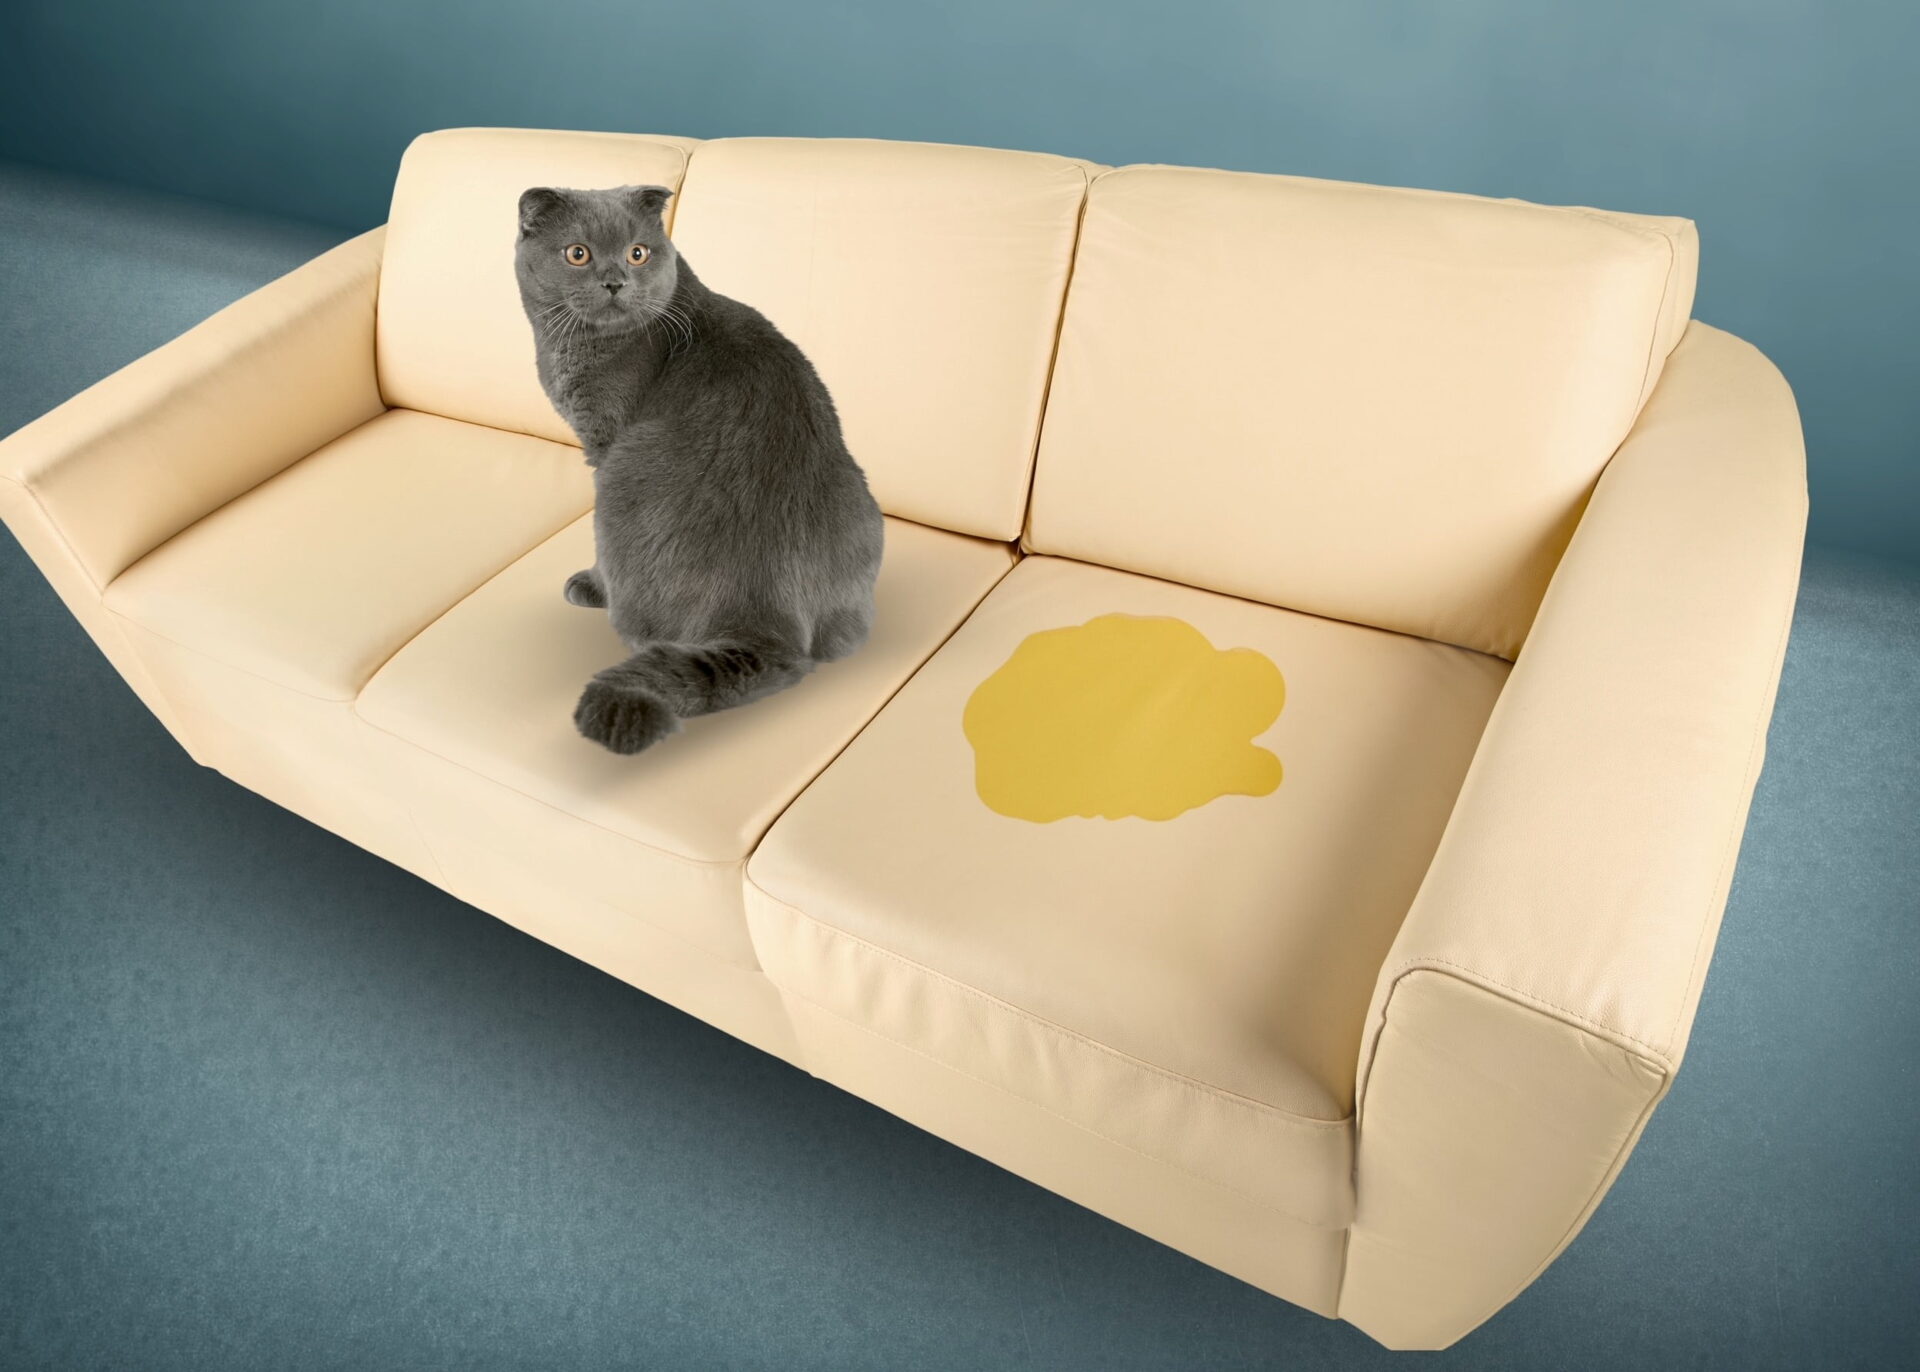 Cat Pee Smell Out of Leather Couch: Quick Tips